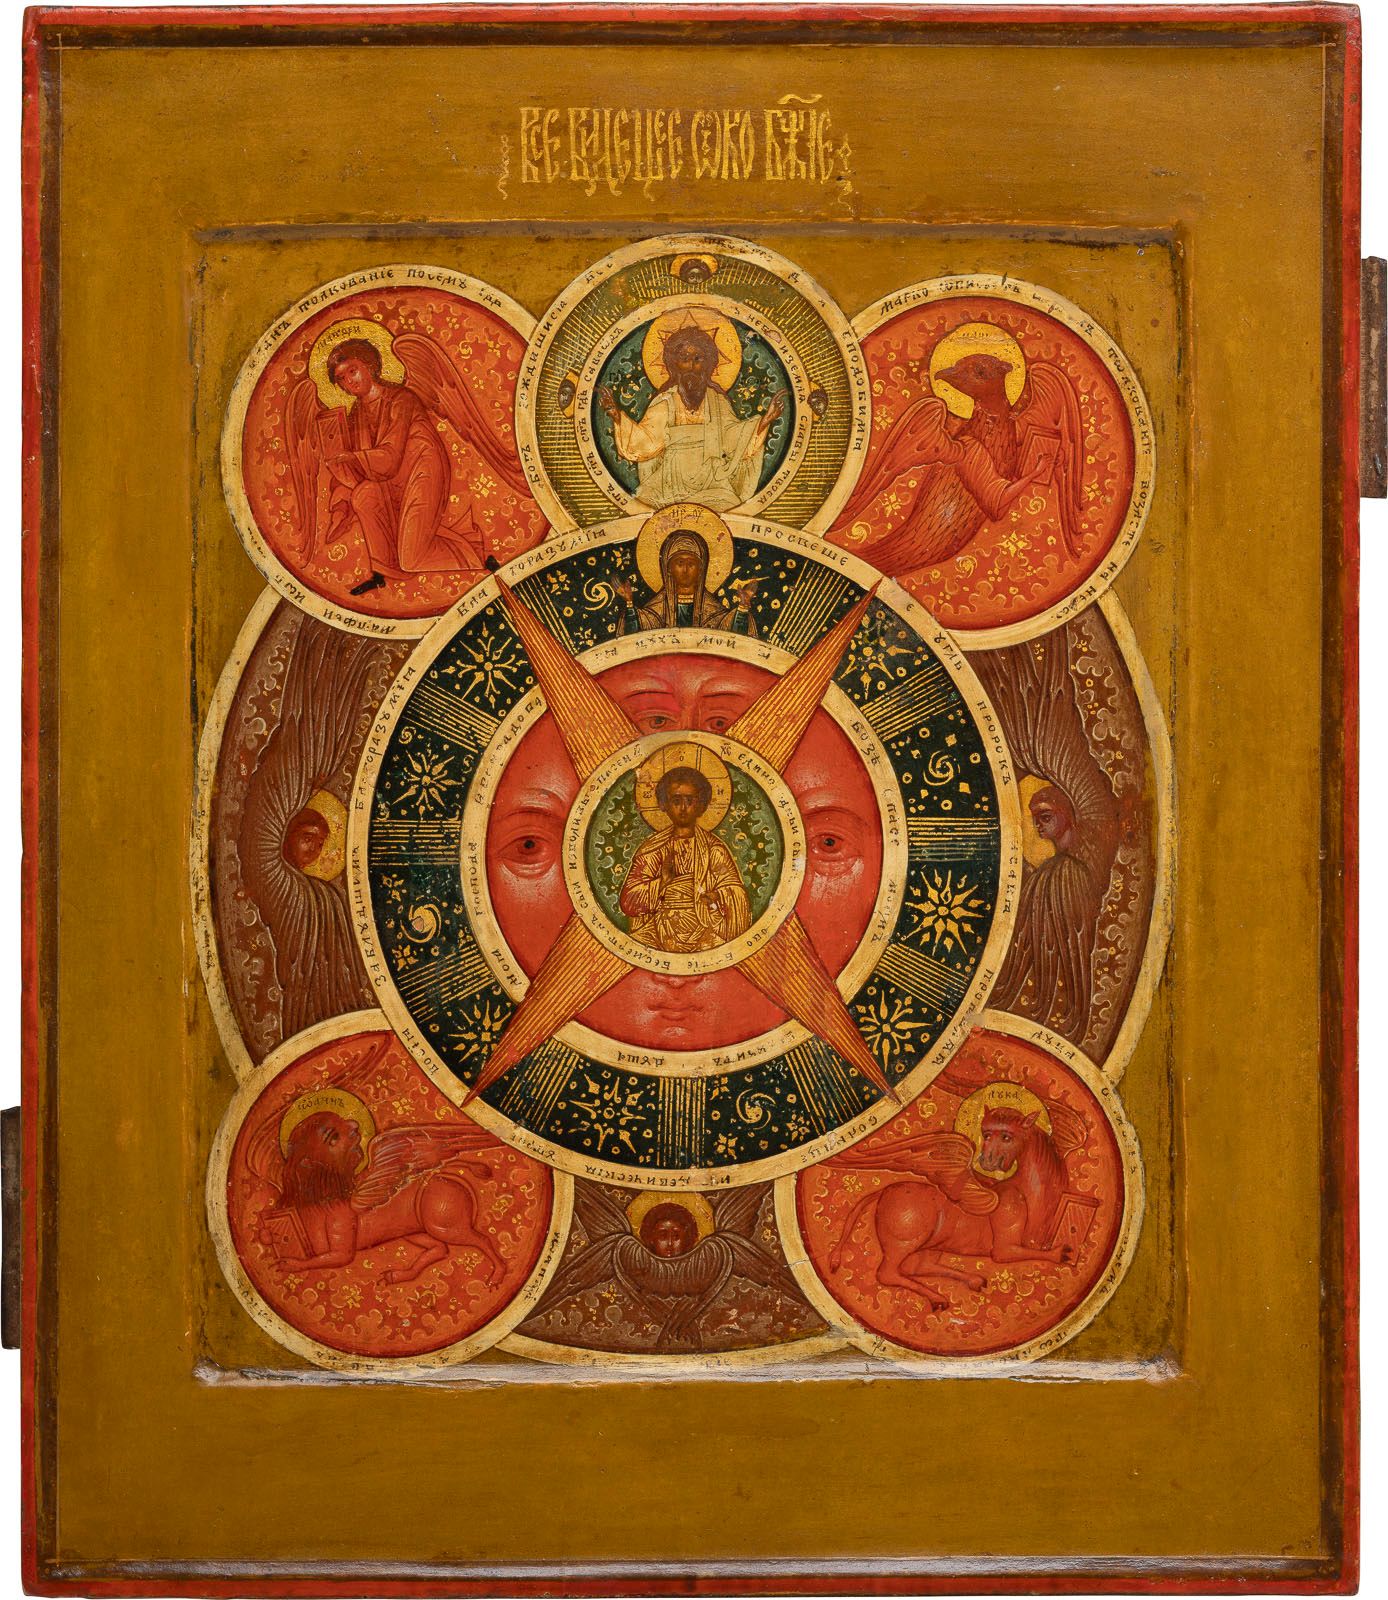 A FINE ICON SHOWING THE 'ALL-SEEING EYE OF GOD' FINO ICONO QUE MUESTRA EL "OJO D&hellip;